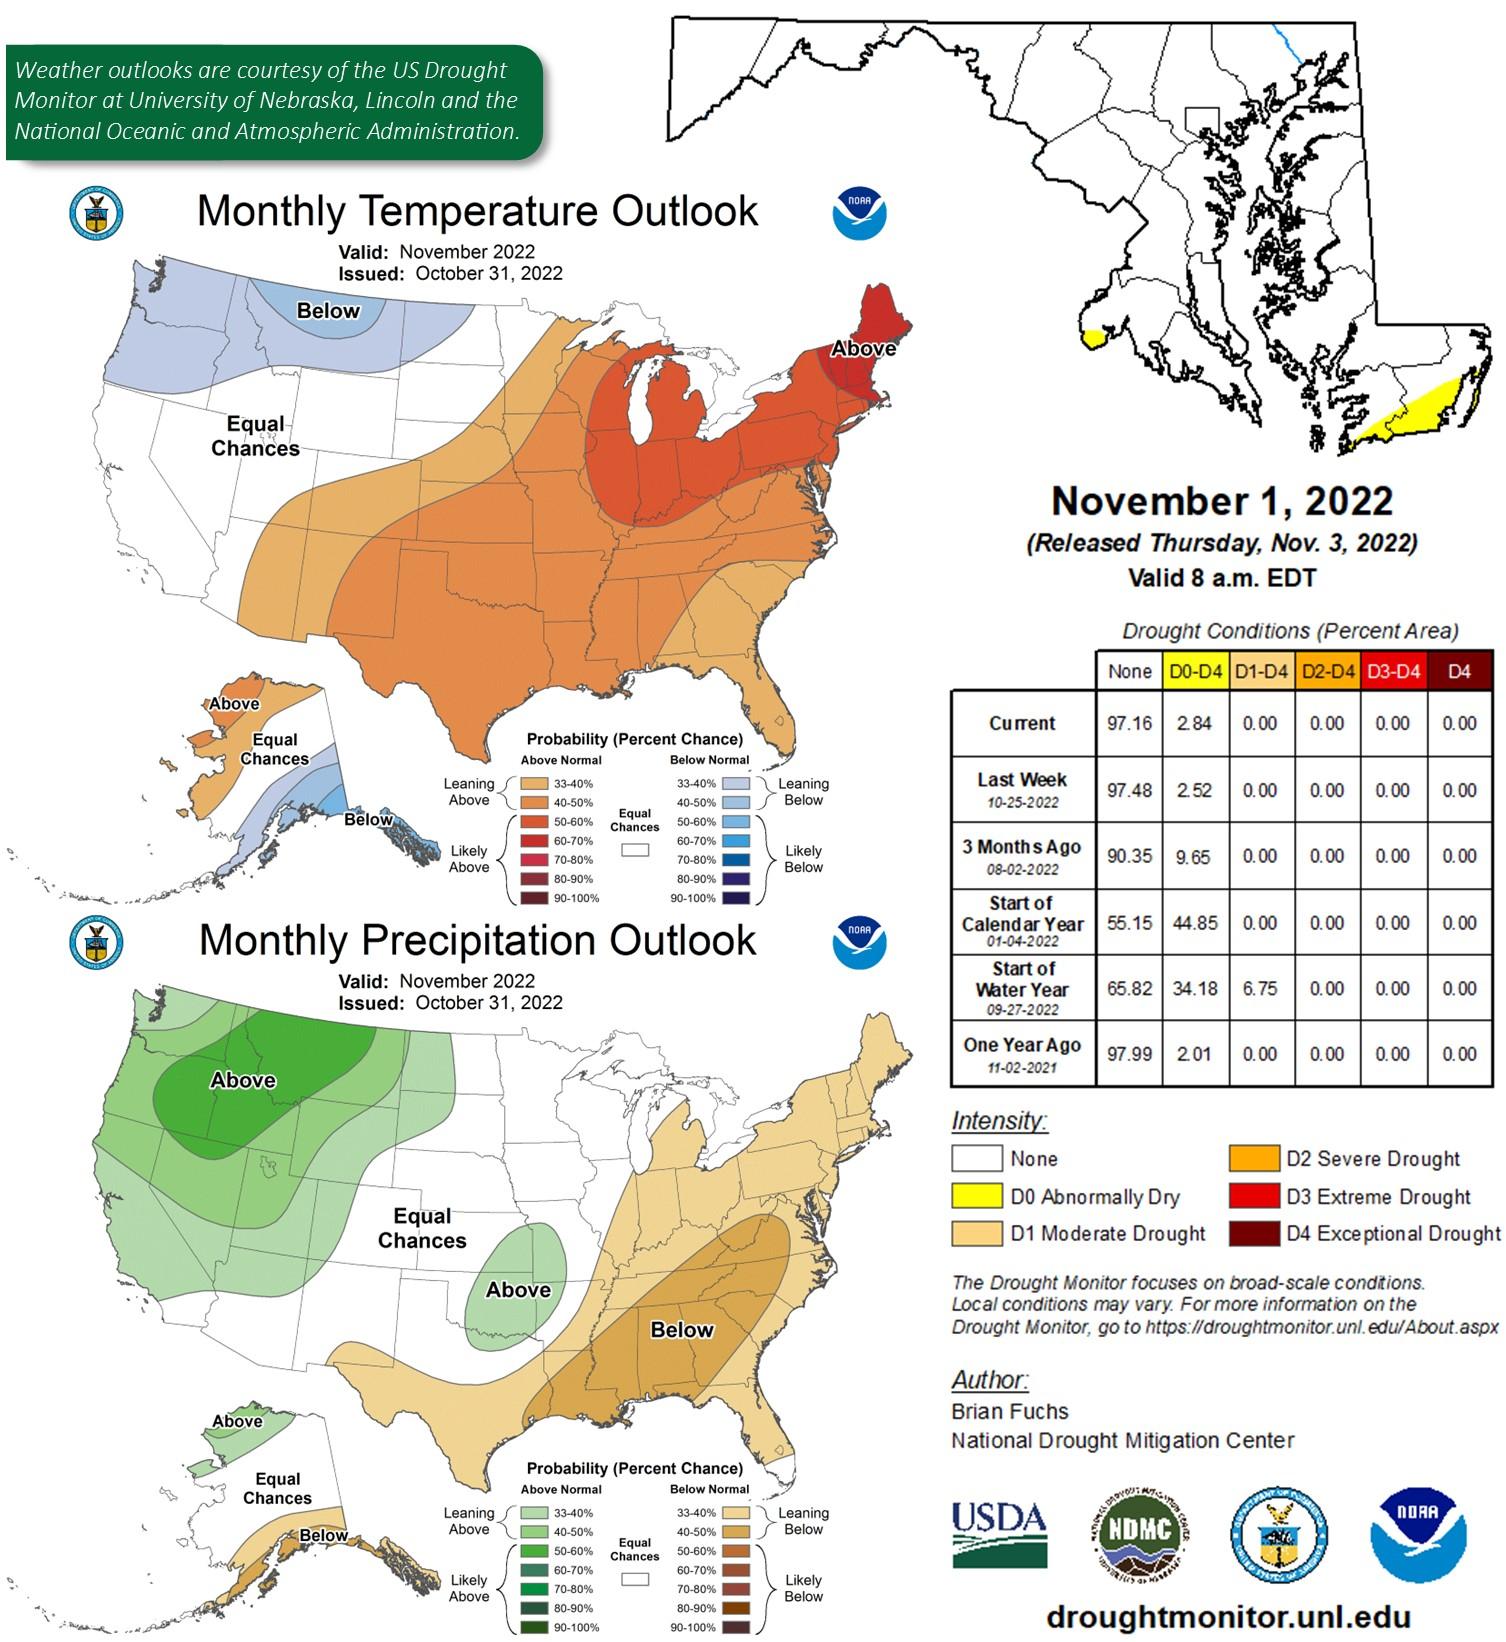 Weather outlook for Nov. 2022 (temperature, drought conditions, and precipitation)